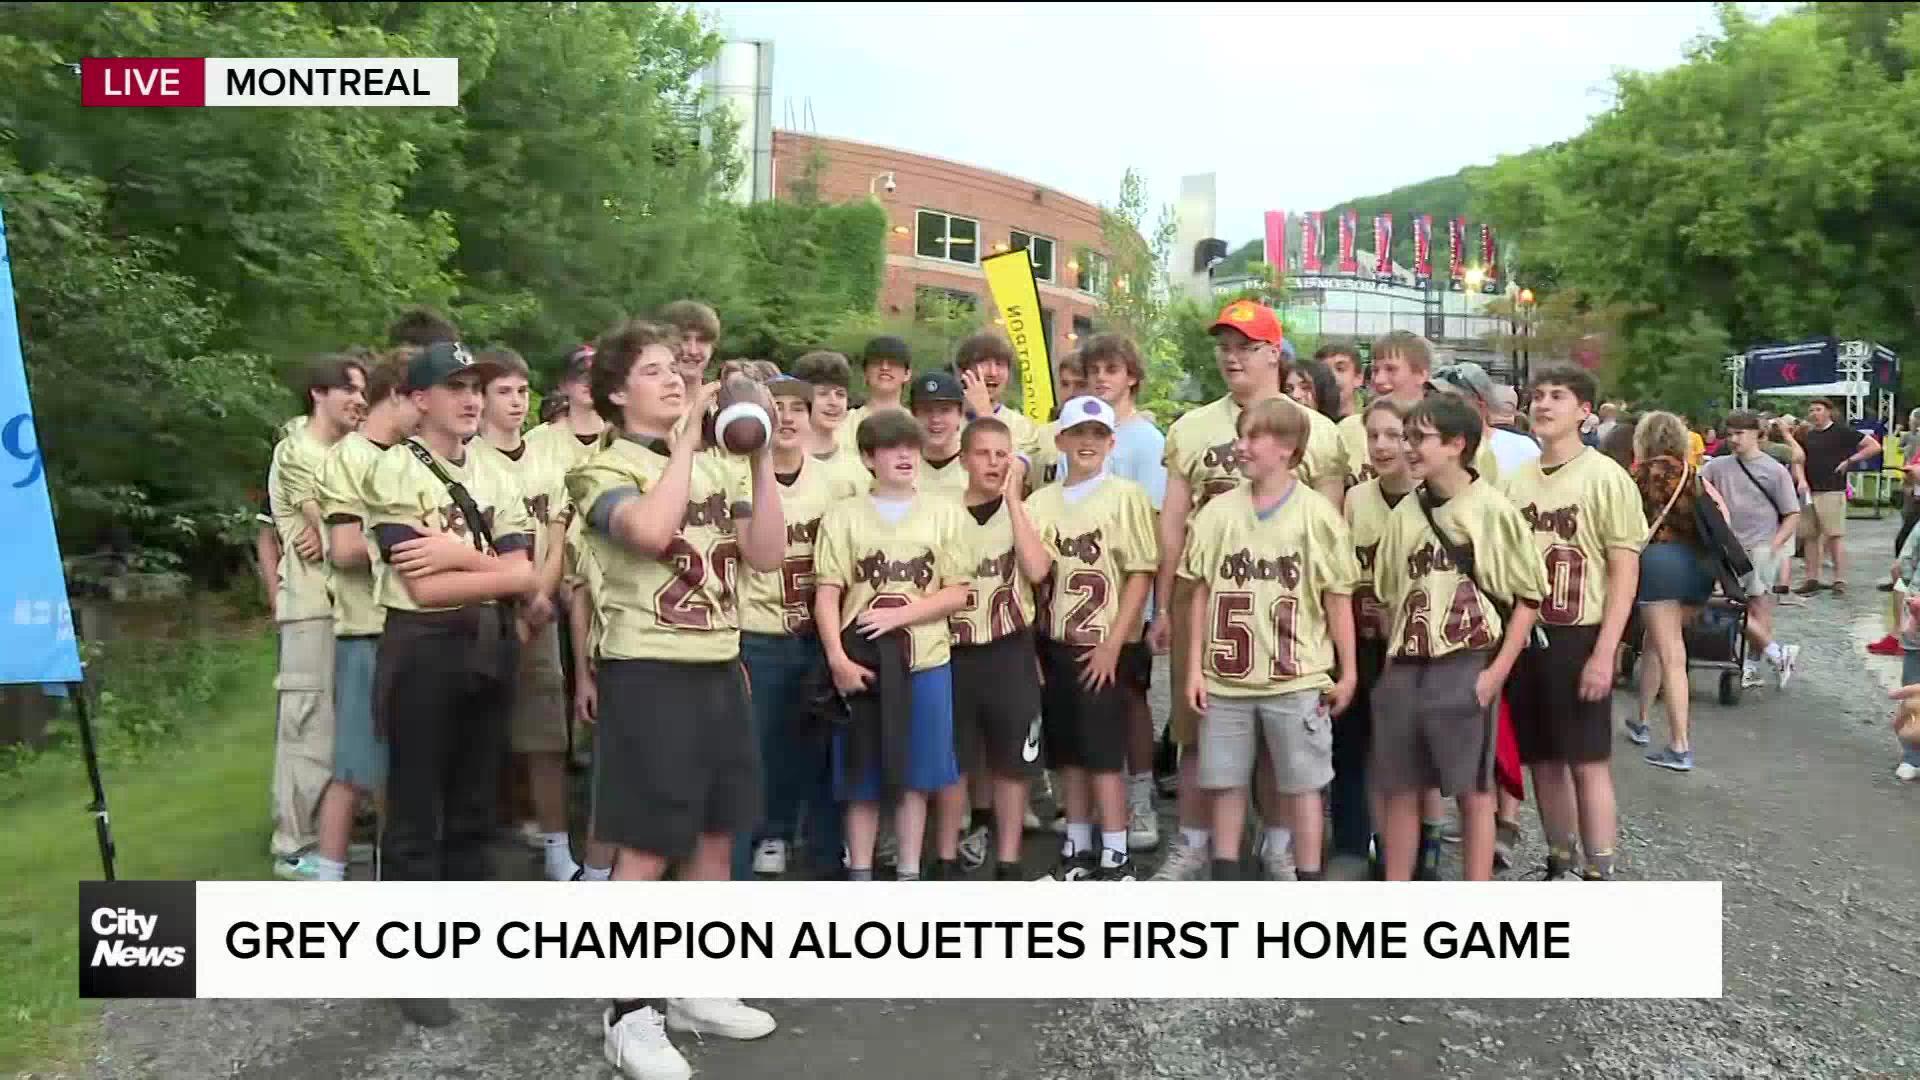 Alouettes fans excited for home opener